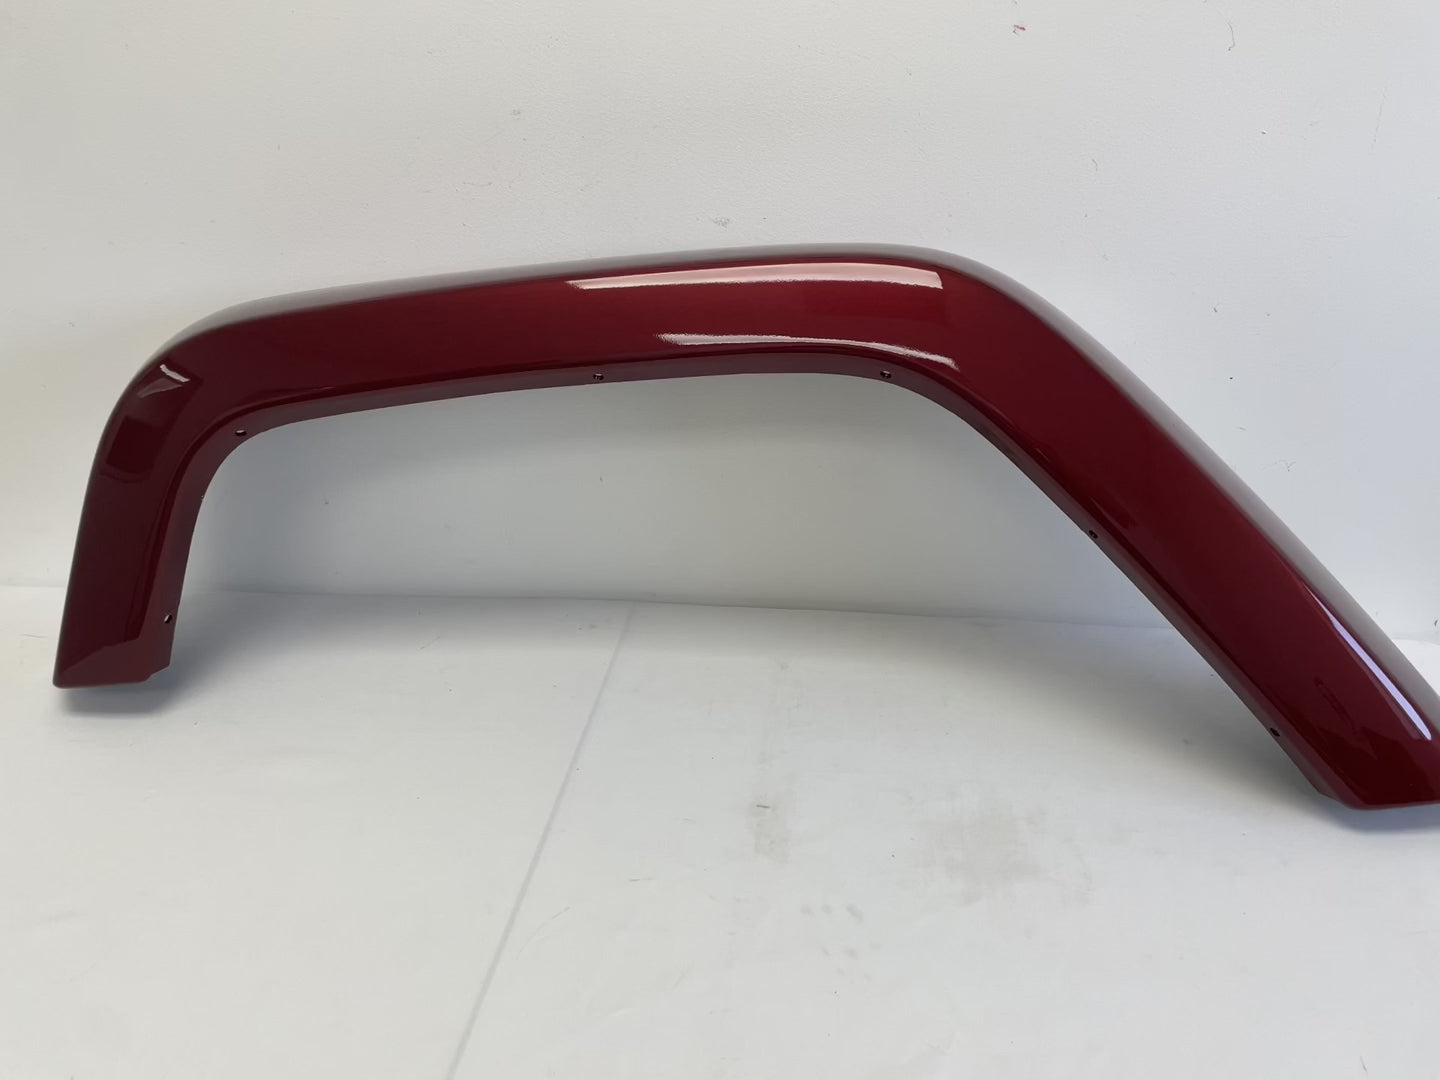 2007-2017 Jeep Wrangler Rear Fender Flare Painted (OEM | Passenger-Side) Deep Cherry Red Crystal Pearl (PRP) 5KC84TZZAG